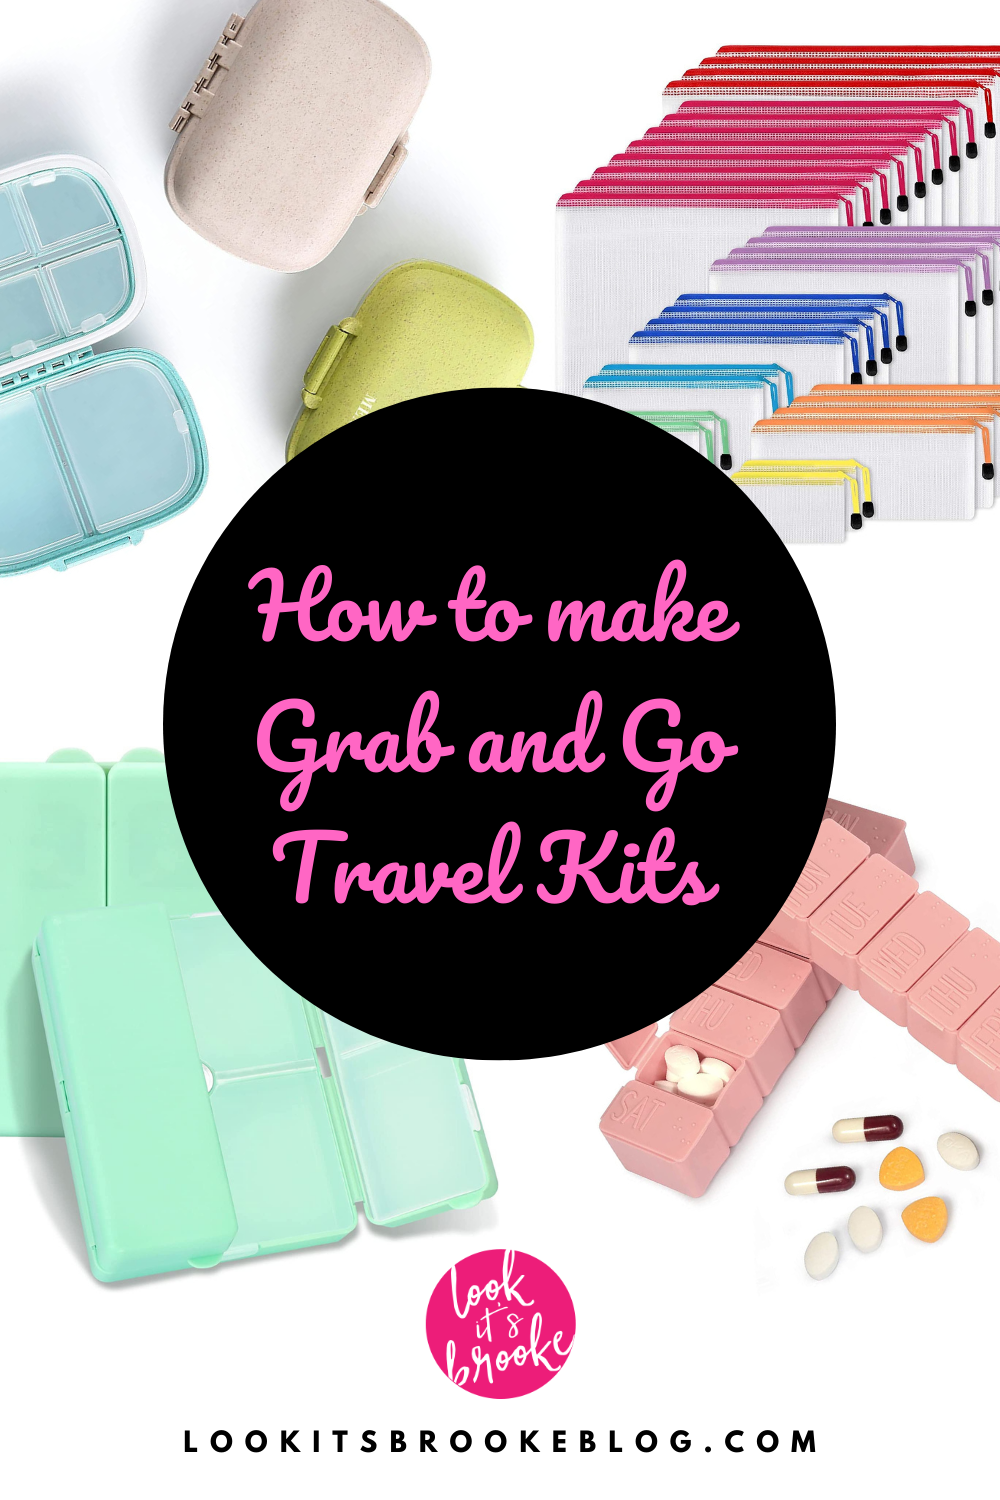 Travel Grab and Go Kits, Look It's Brooke